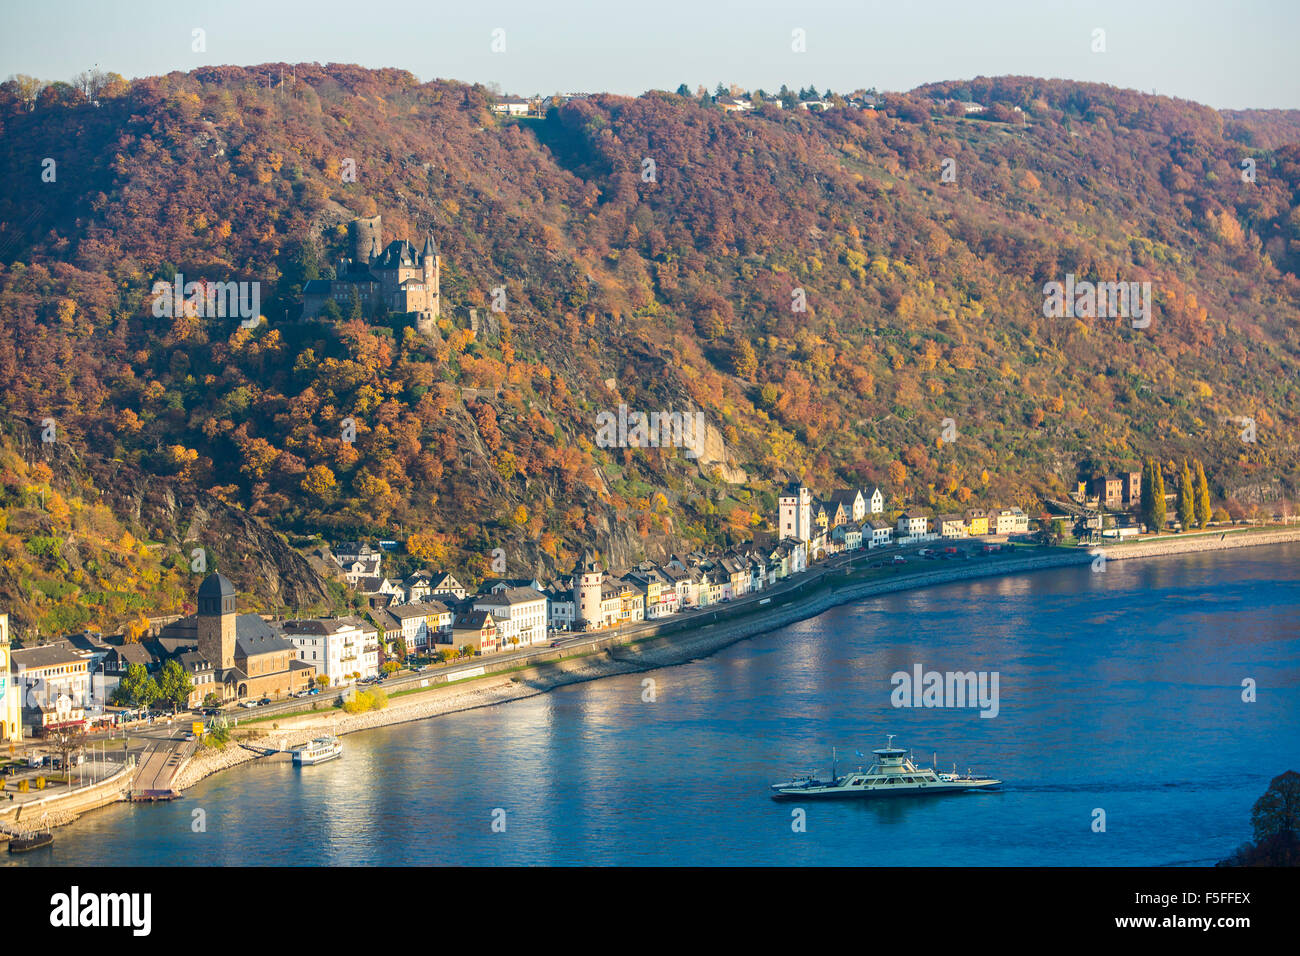 Katz castle, above St. Goarshausen, Upper Middle Rhine valley, Germany, car ferry Stock Photo